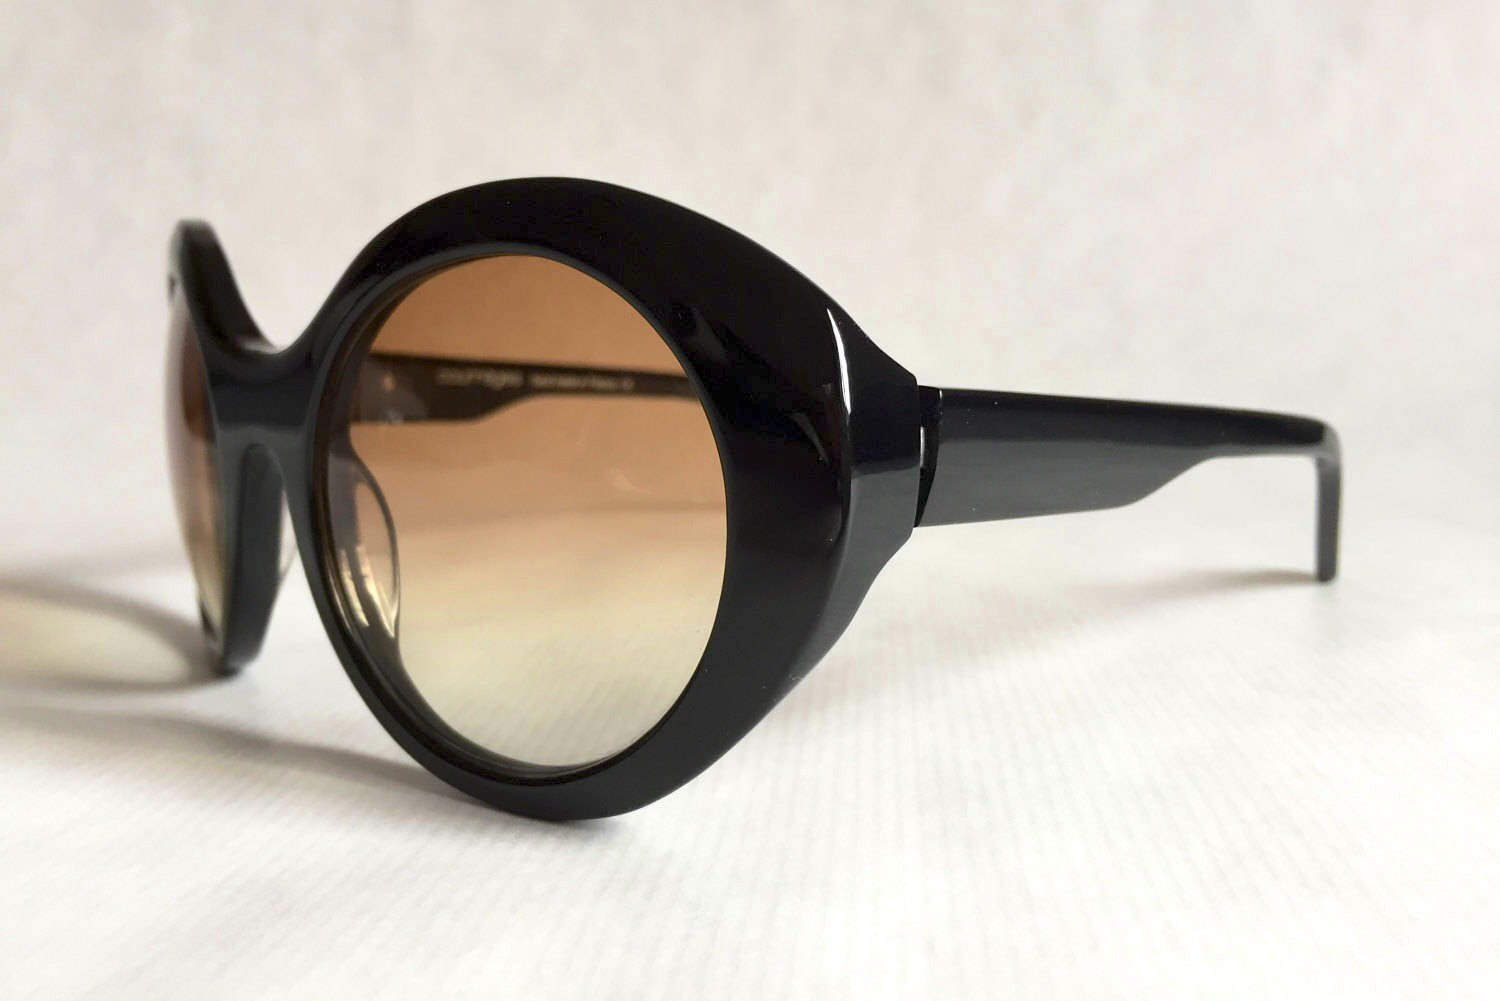 Courreges CL 1512 Vintage Sunglasses Made in France New Old Stock ...